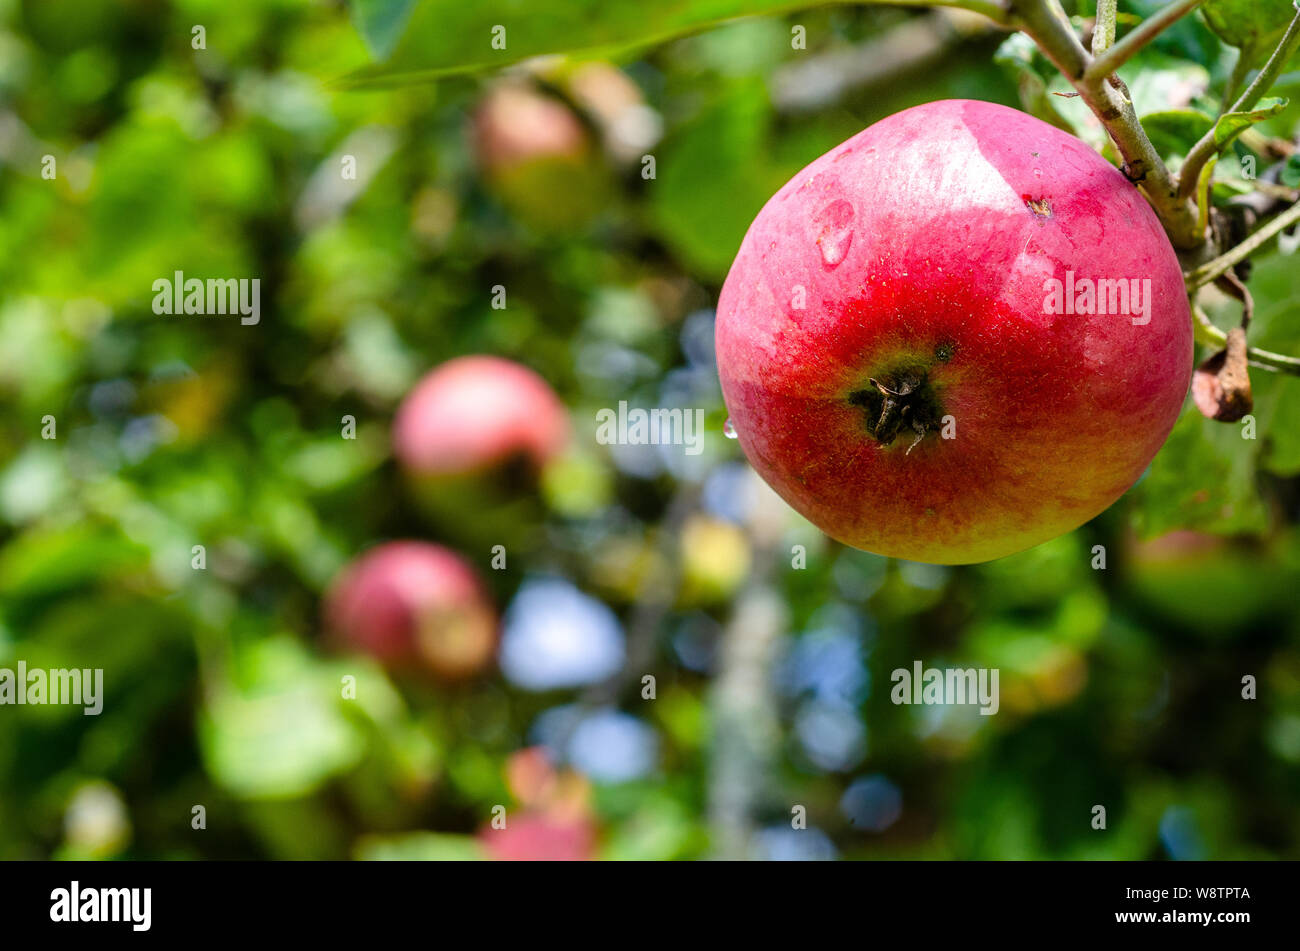 An apple fruit hanging on a branch Stock Photo